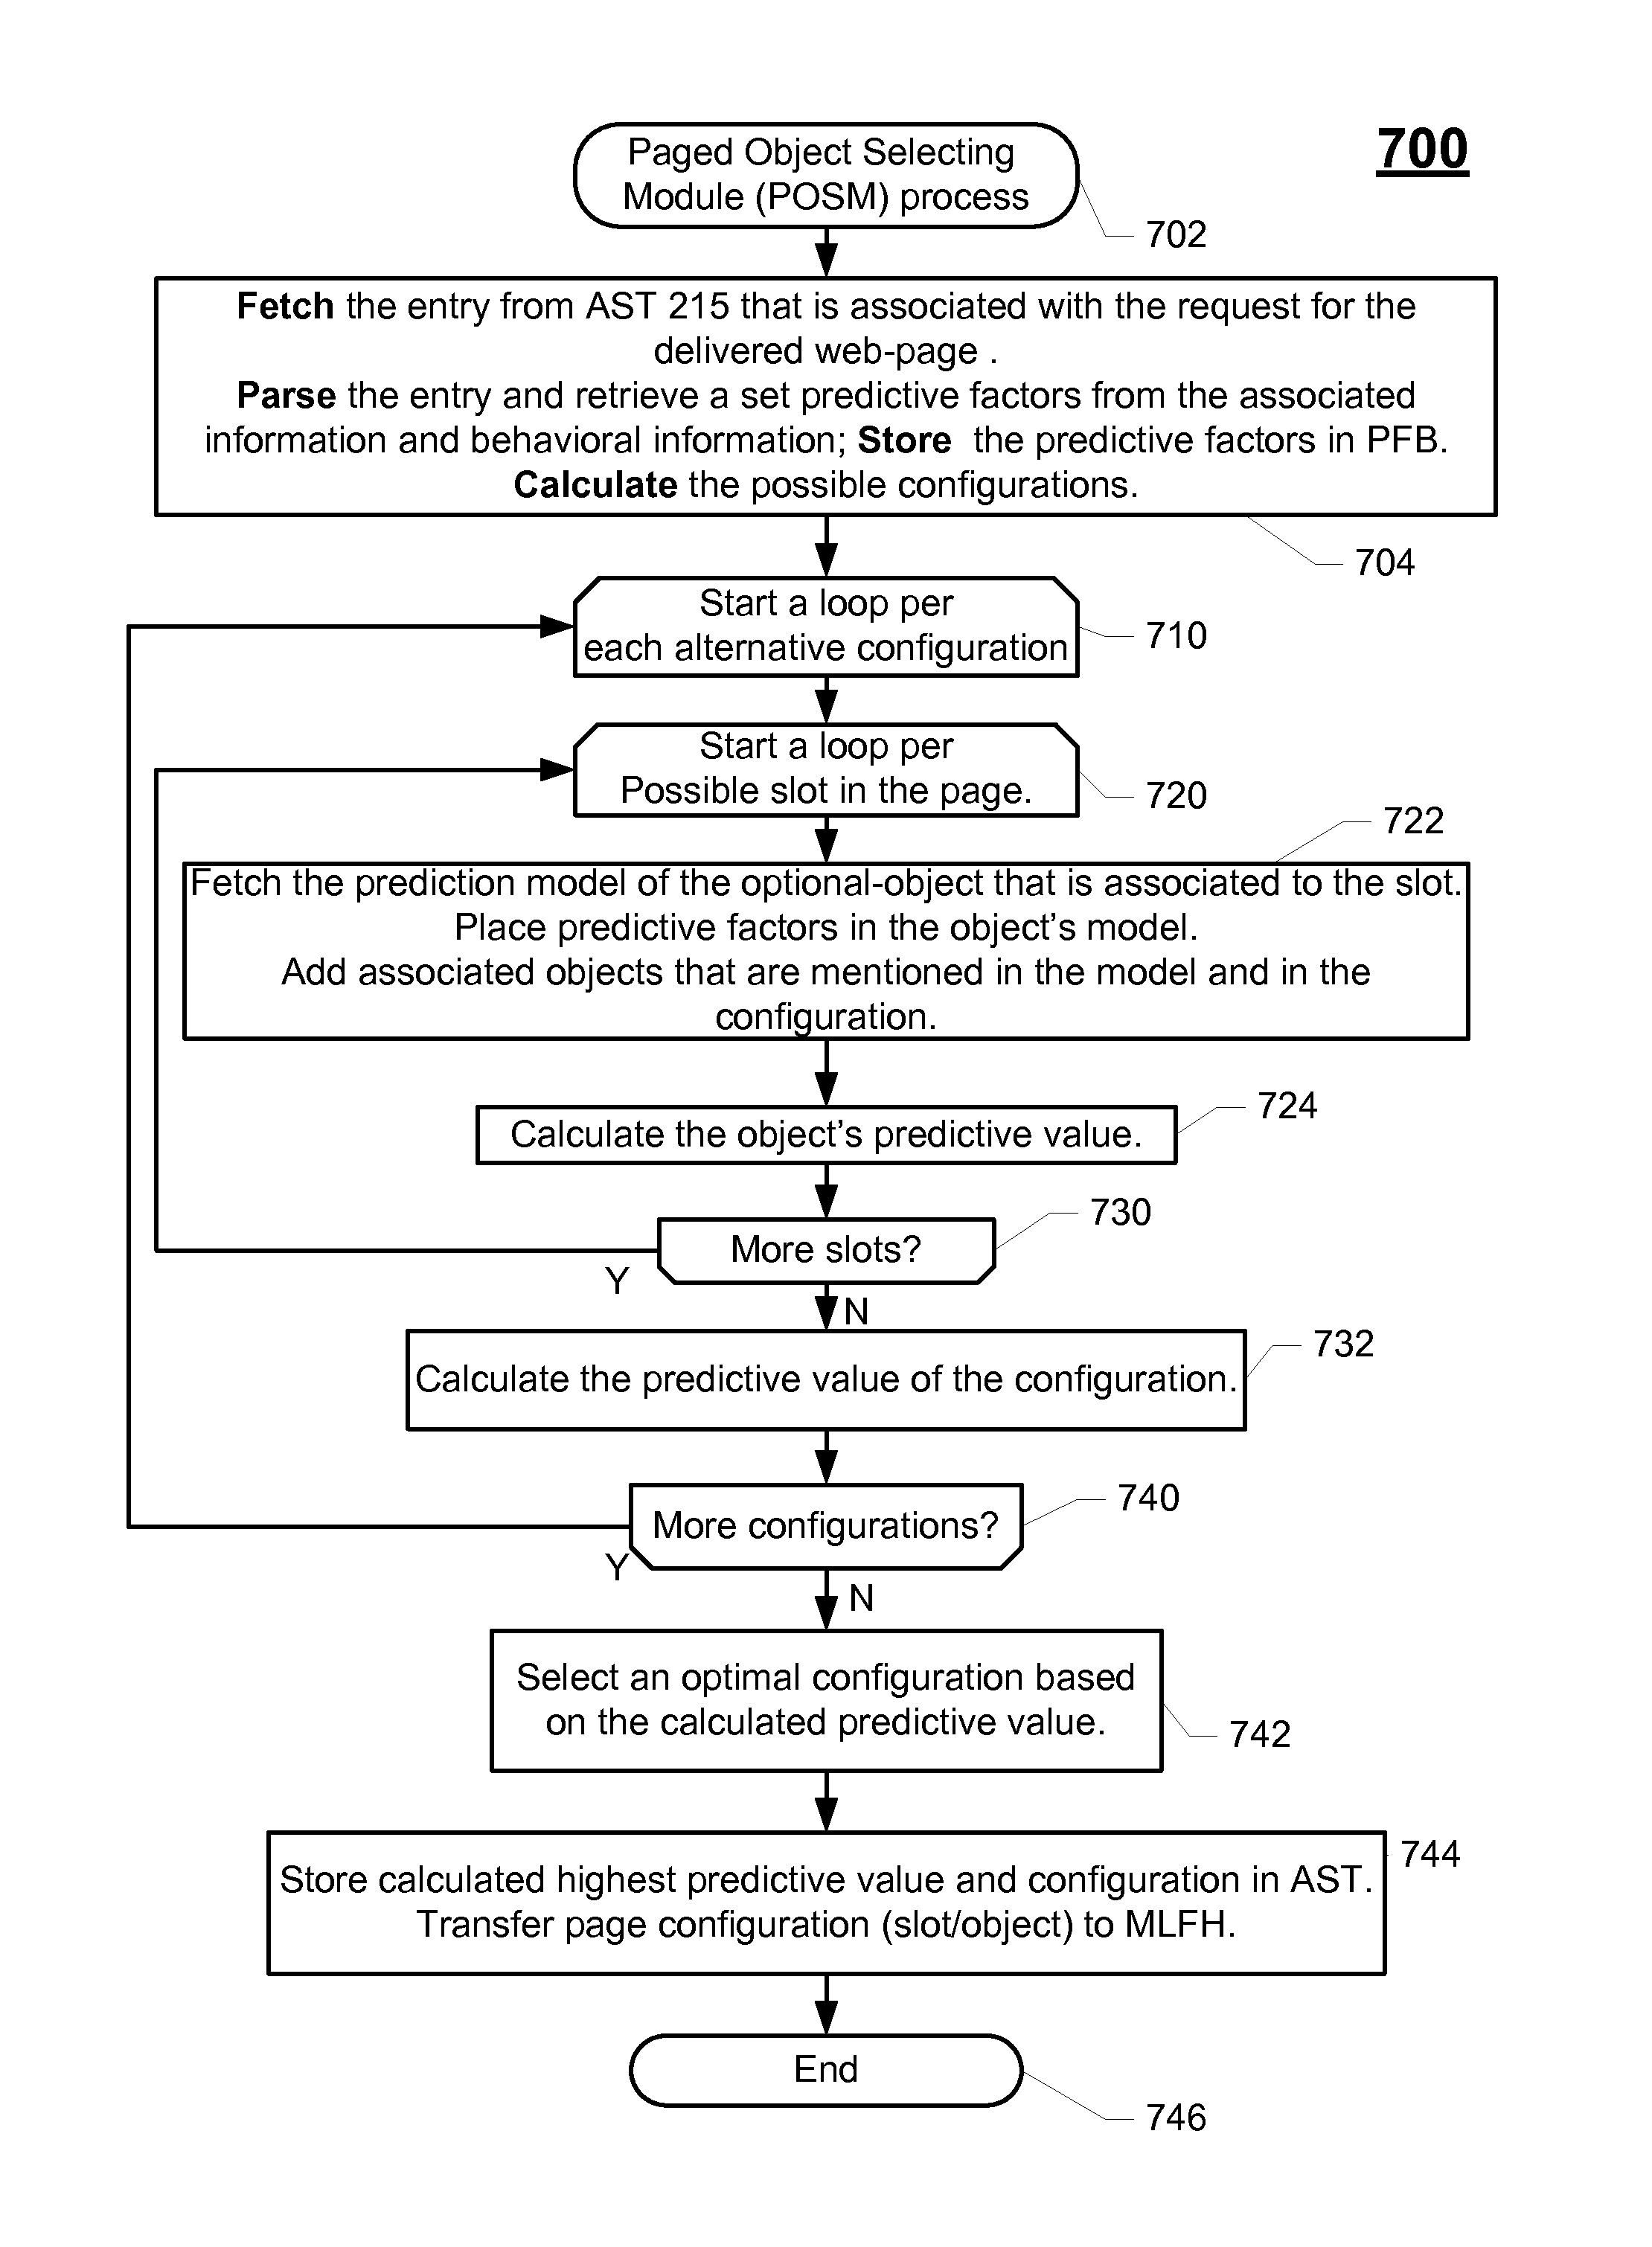 Method and system for creating a predictive model for targeting web-page to a surfer